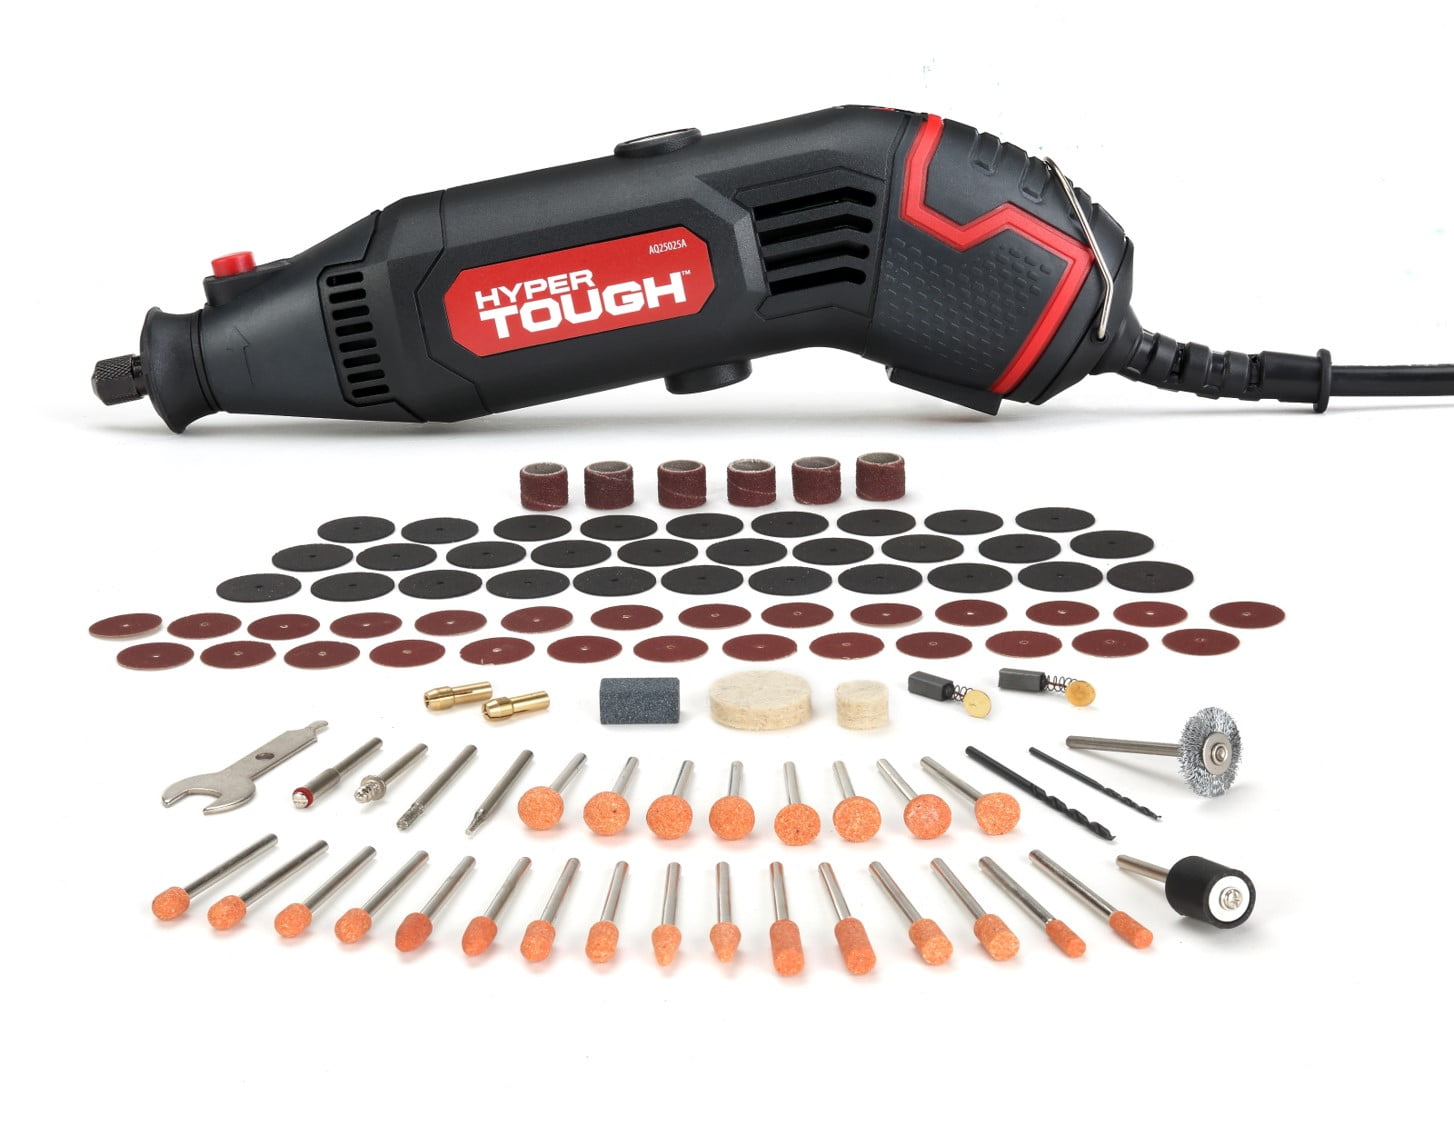 Hyper Tough 1.5 Amp Corded Rotary Tool, Variable Speed with 105 Rotary Accessories & Storage Case, 120 Volts